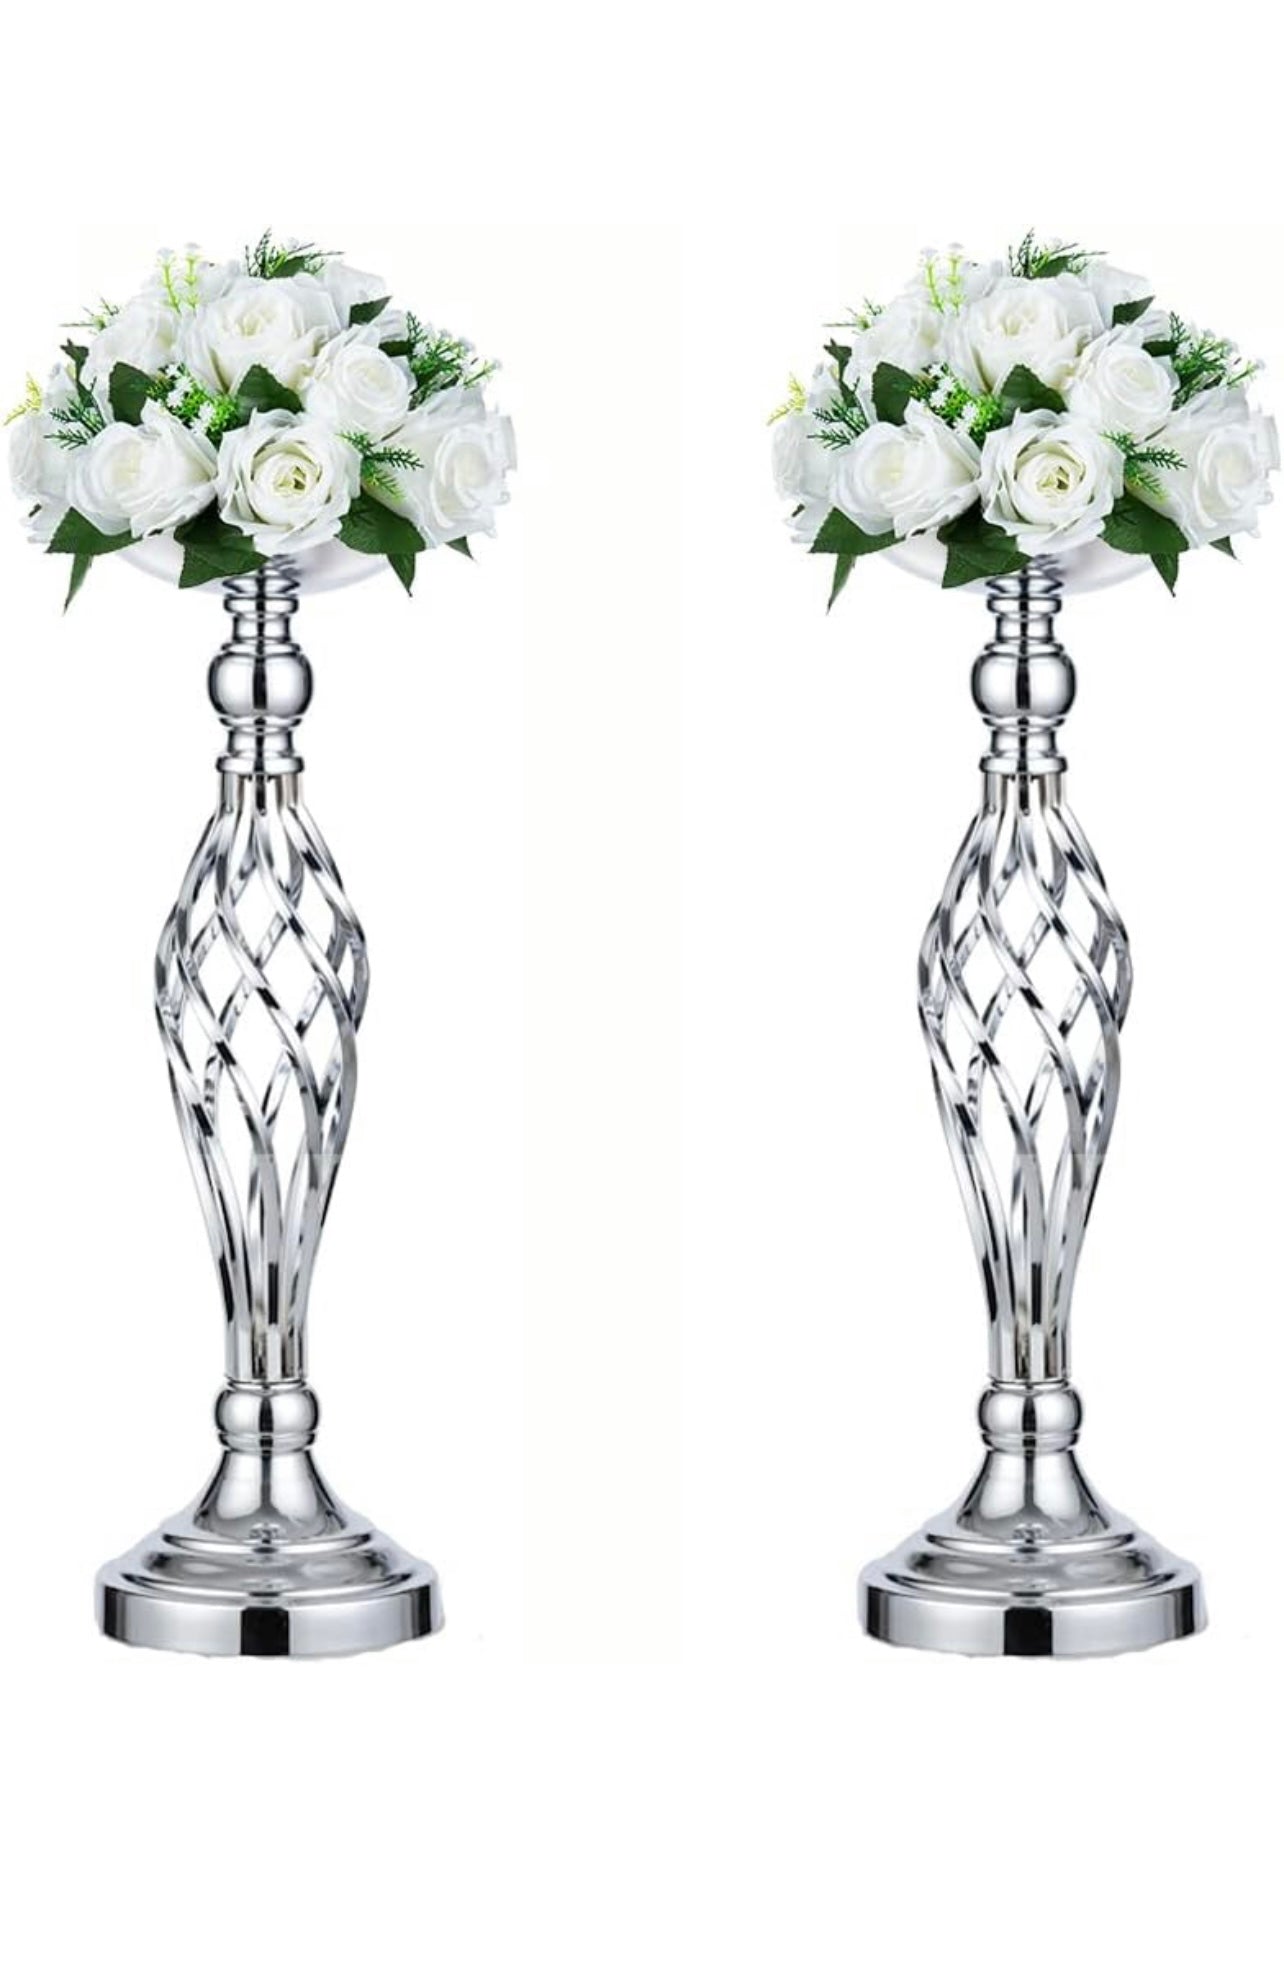 2 Pcs/Set Silver Metal Flower Vase, Wedding/ Party Flowers Centerpieces for Table, Tall Candle Holder for Pillar Candle (17.7inch-45CM)